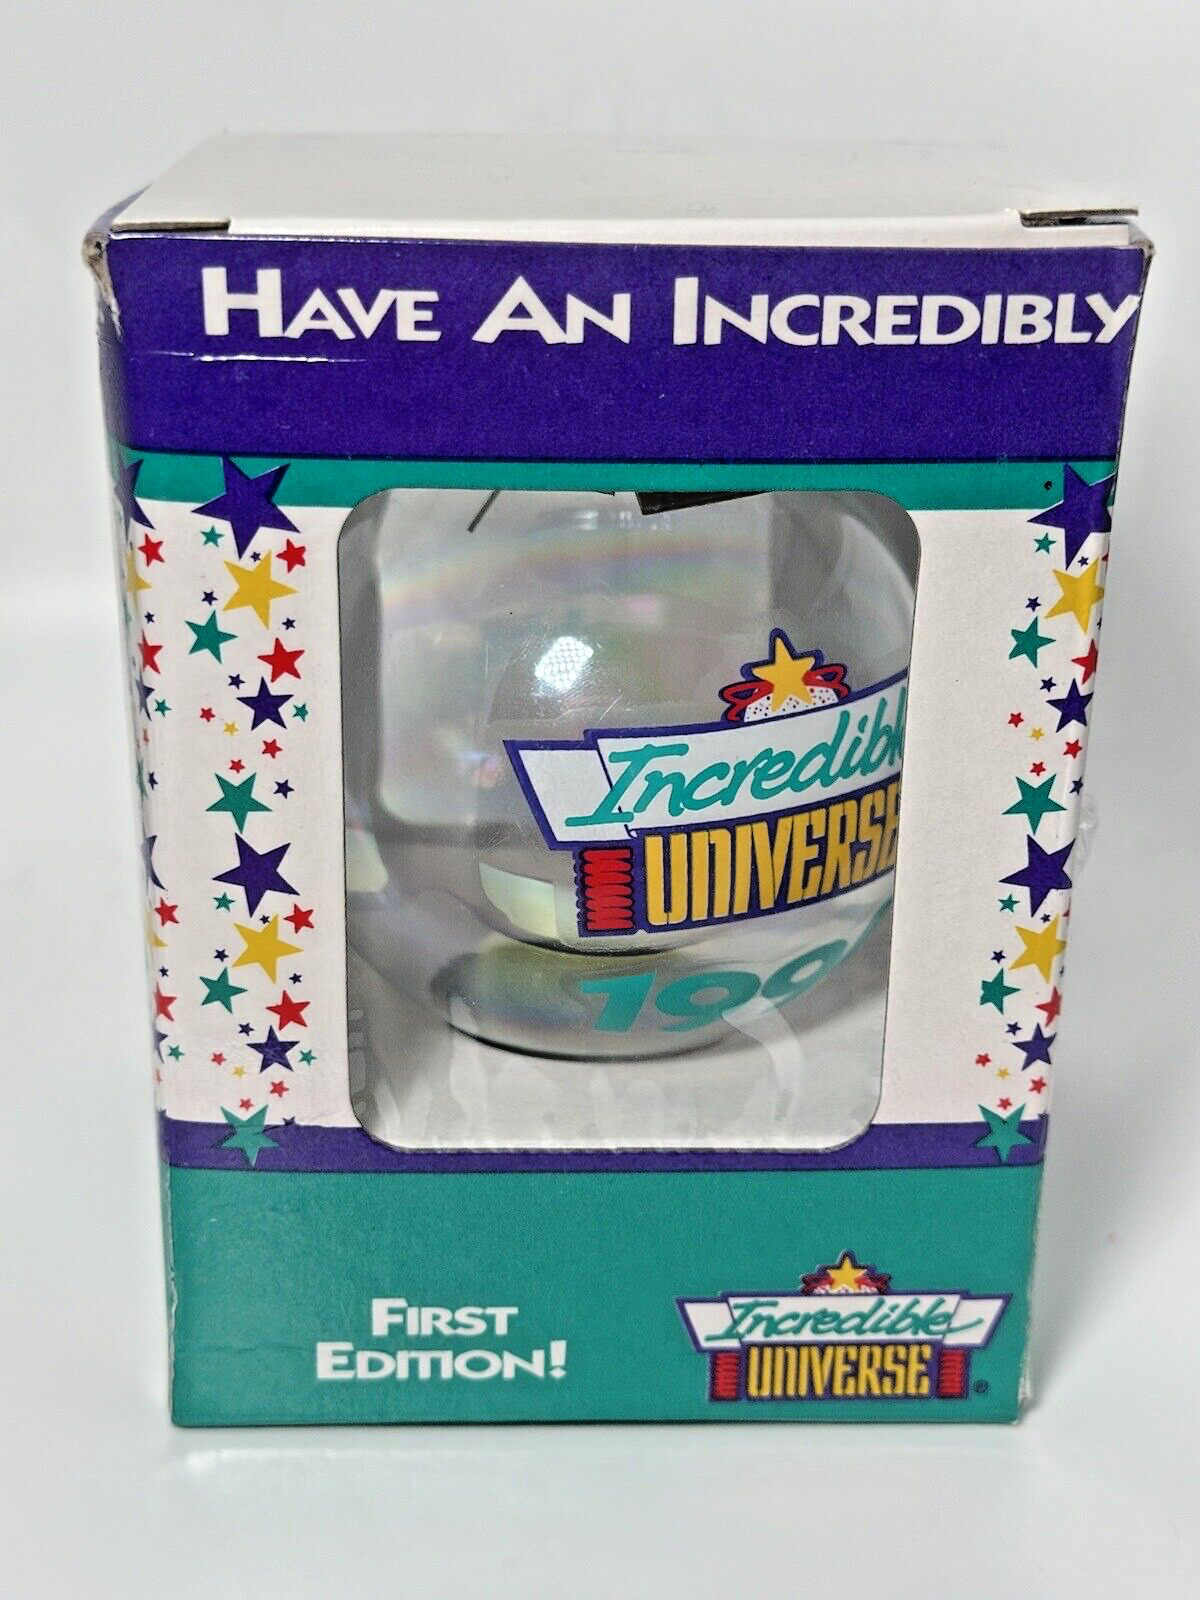 VINTAGE INCREDIBLE UNIVERSE CHRISTMAS ORNAMENT FIRST EDITION 1994 WITH BOX